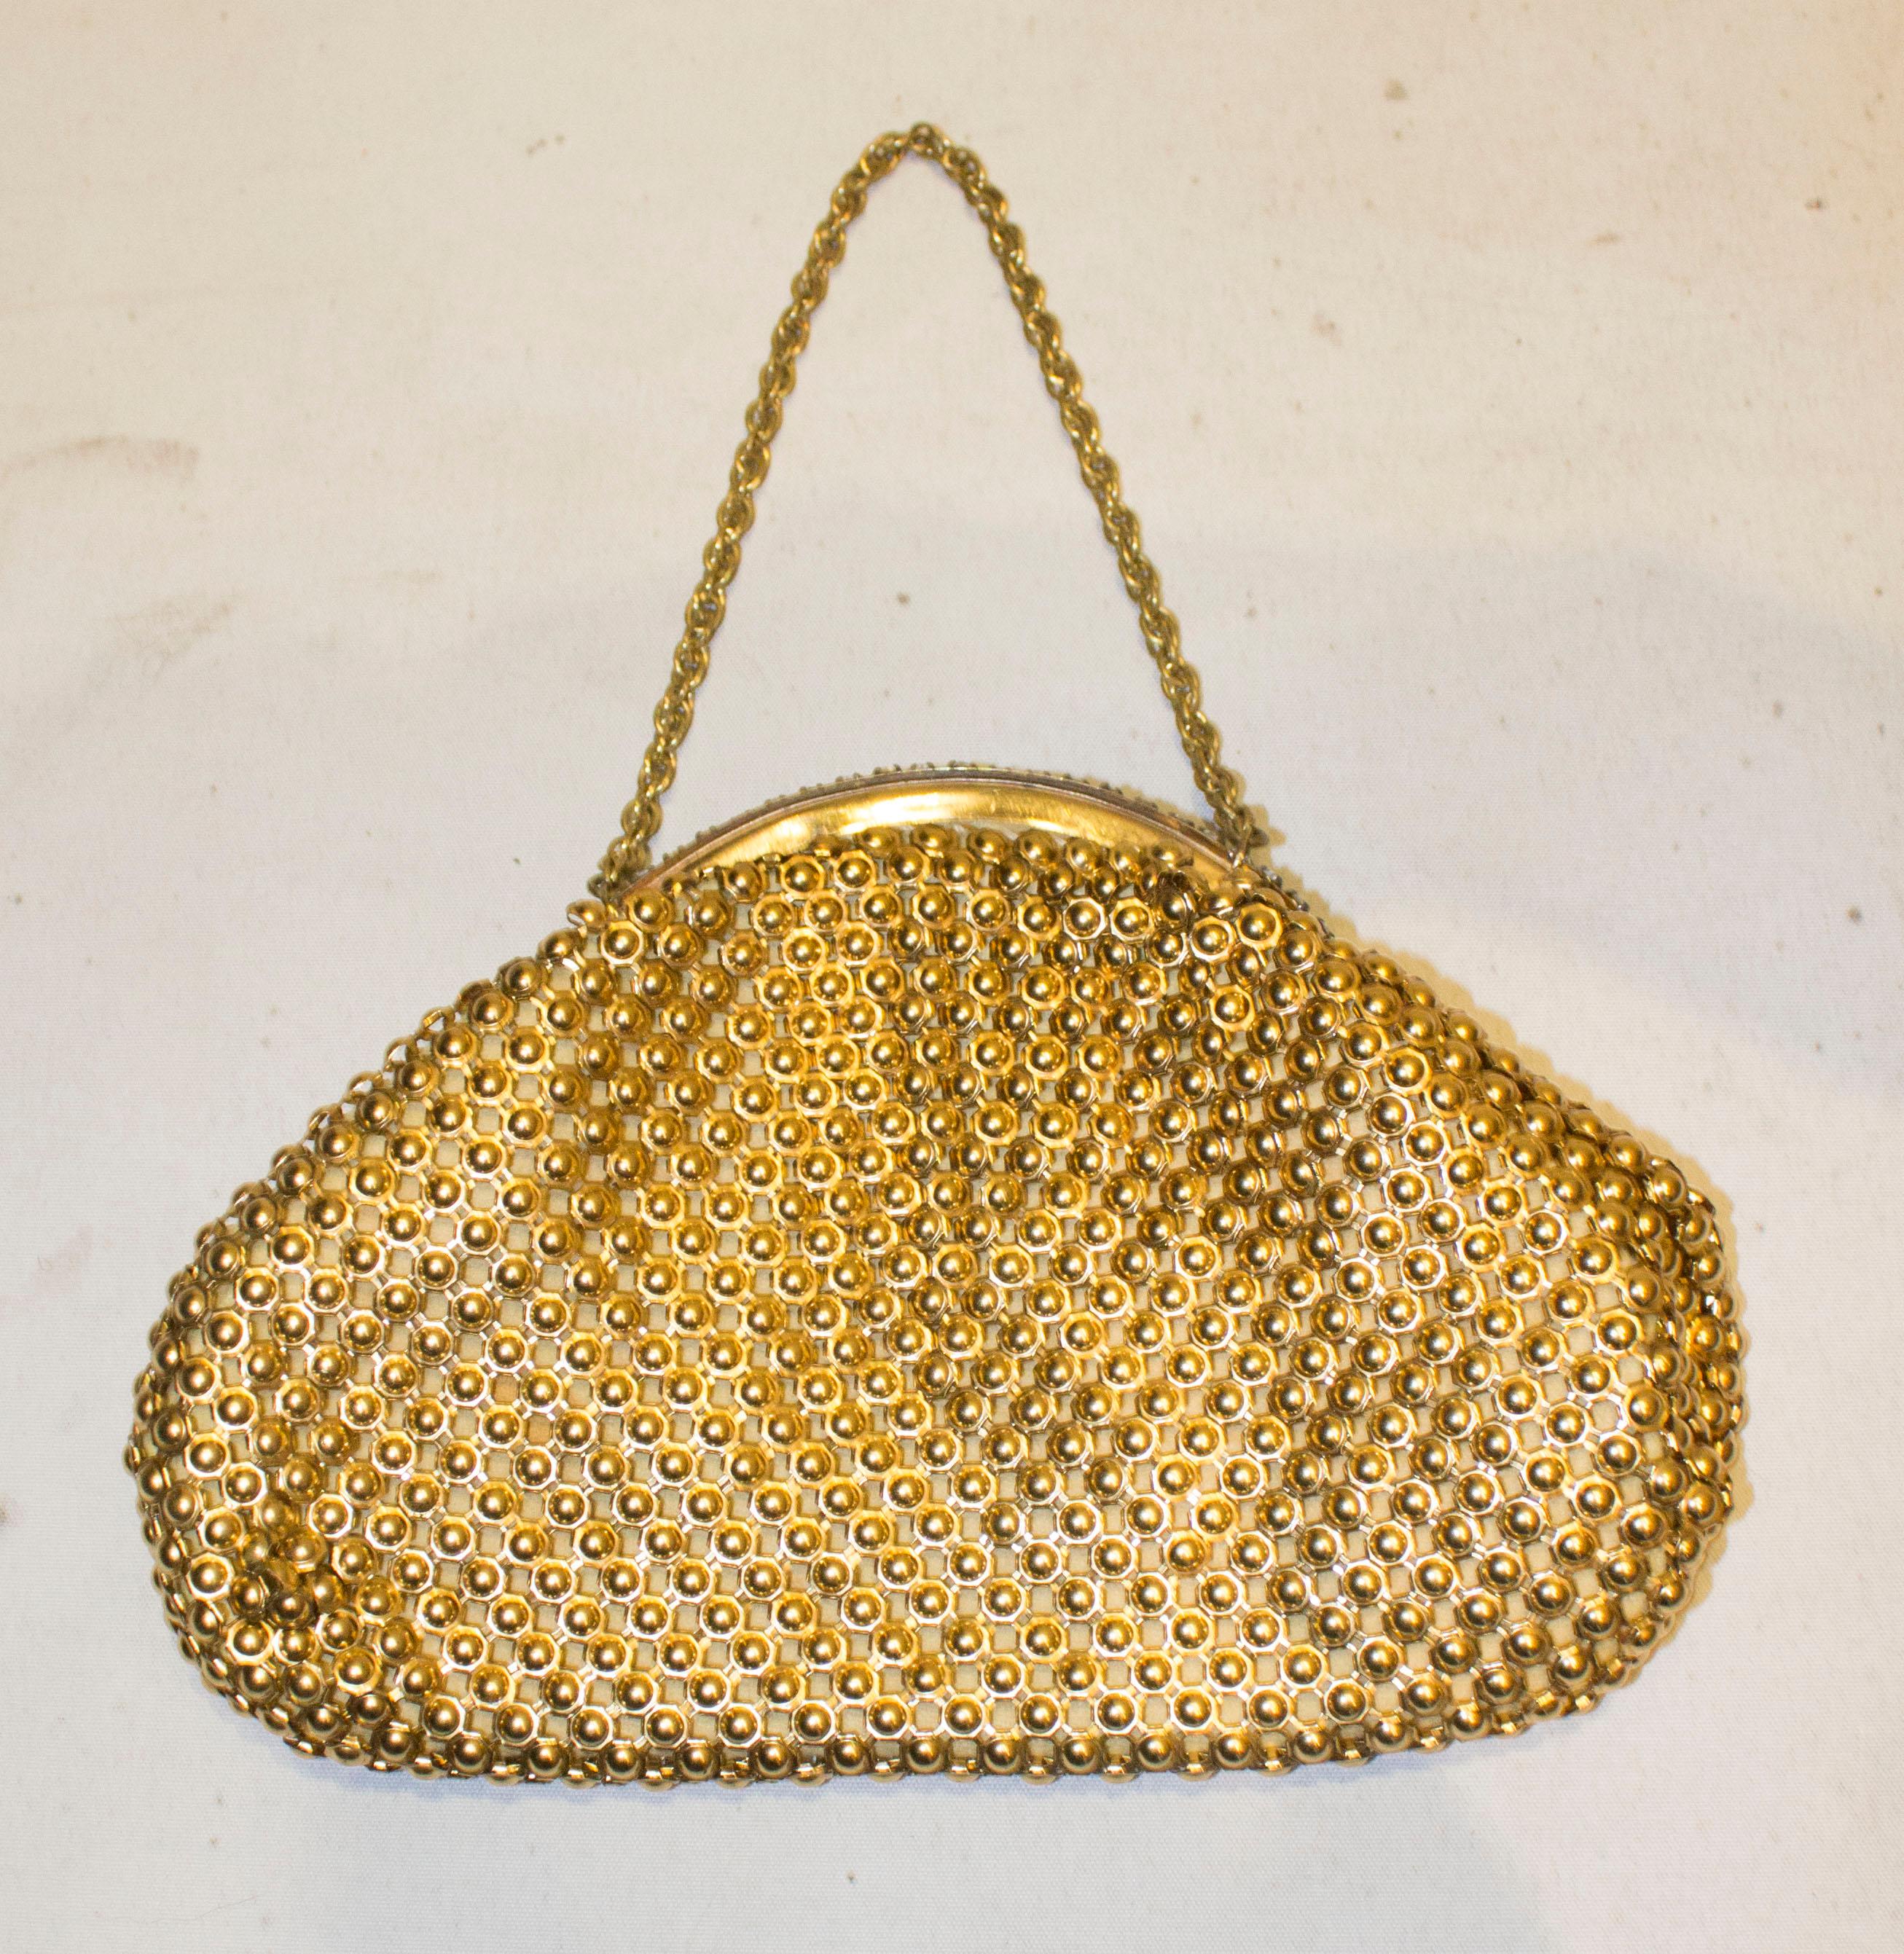 A great bag for evening in  an interesting gold chain metal fabric with diamante decorated frame and clasp. The bag is lined in satin with one pouch pocket and has a 12'' chain handle.
Measurements: width 8'', height 5 1/2''